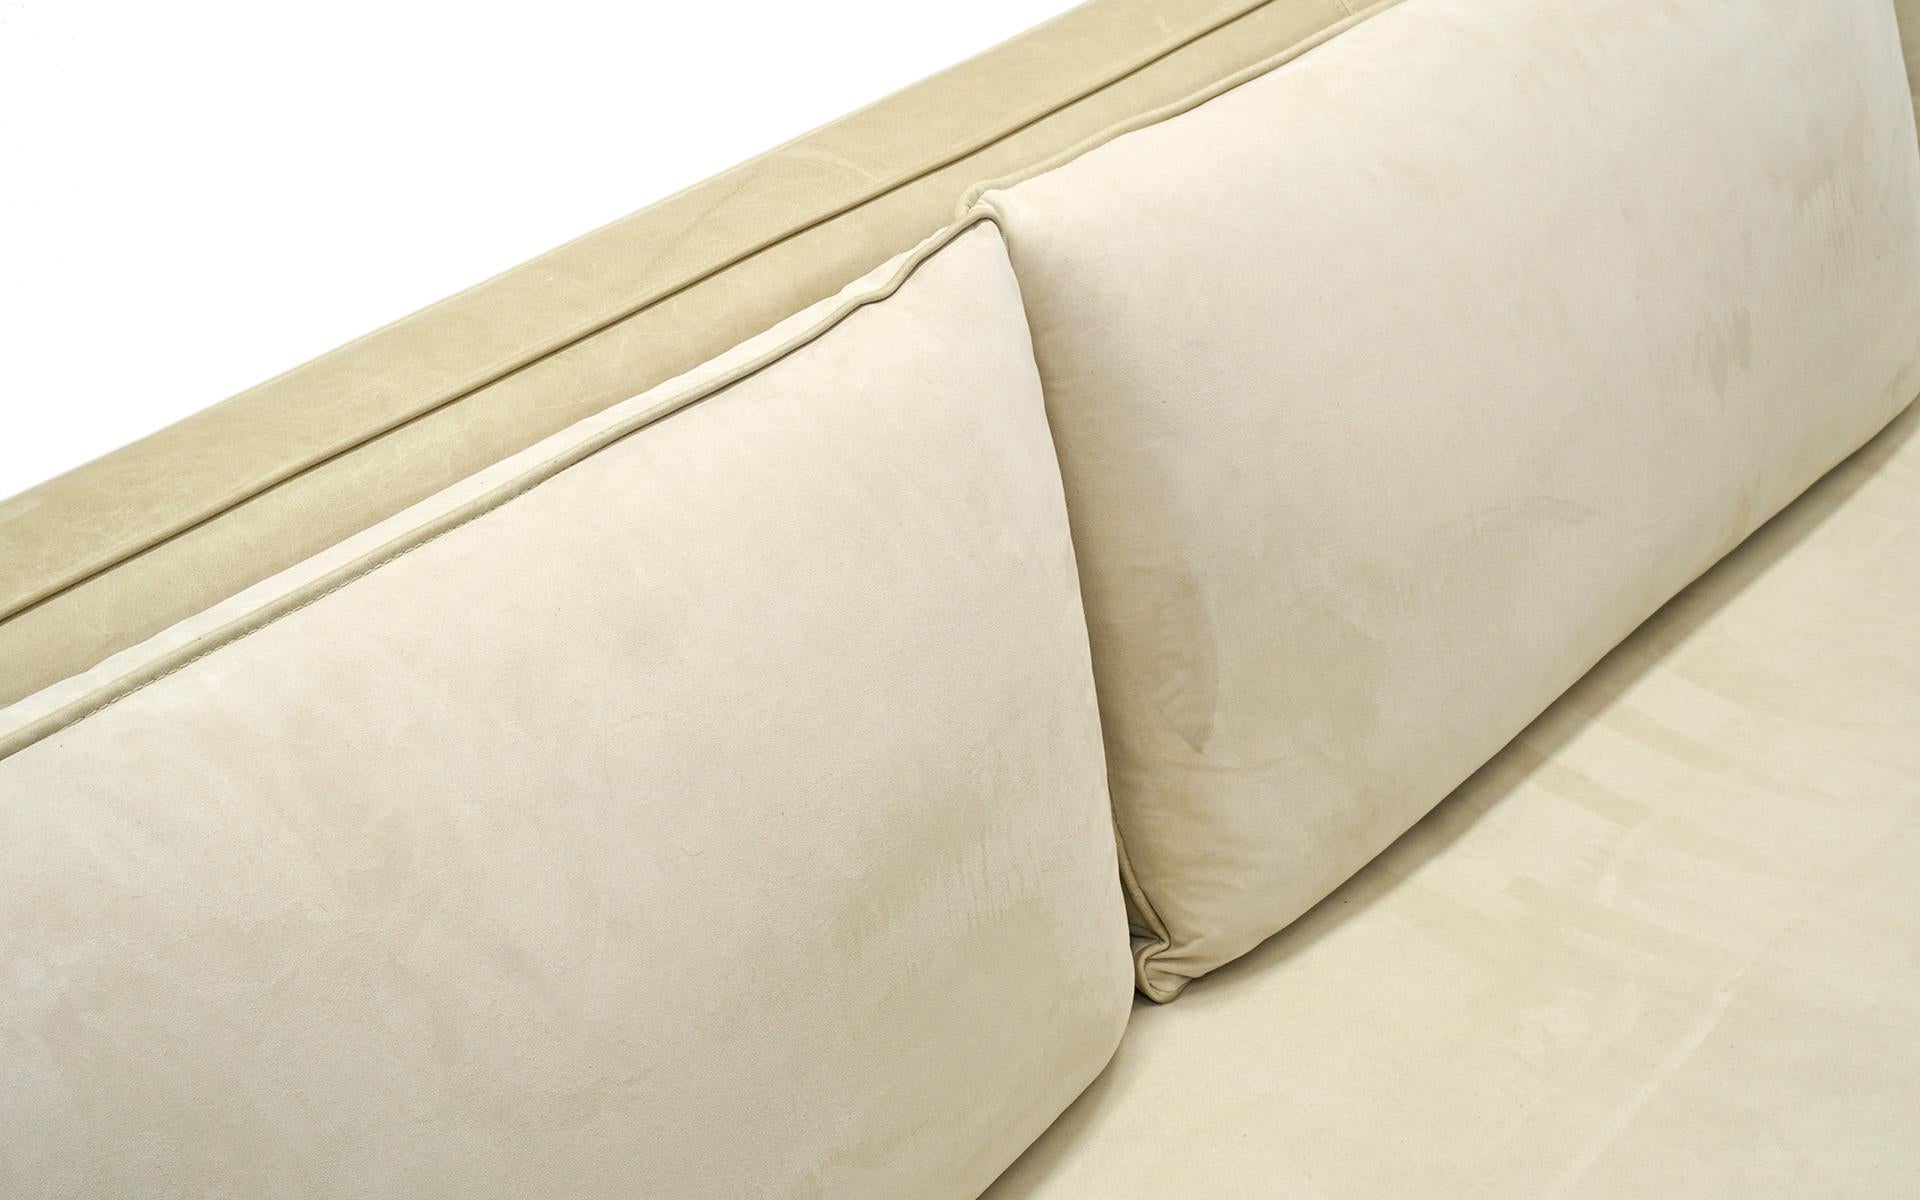 Contemporary Sofa in Off White /Beige Leather with Mohair Cushions by Niedermaier, Chicago